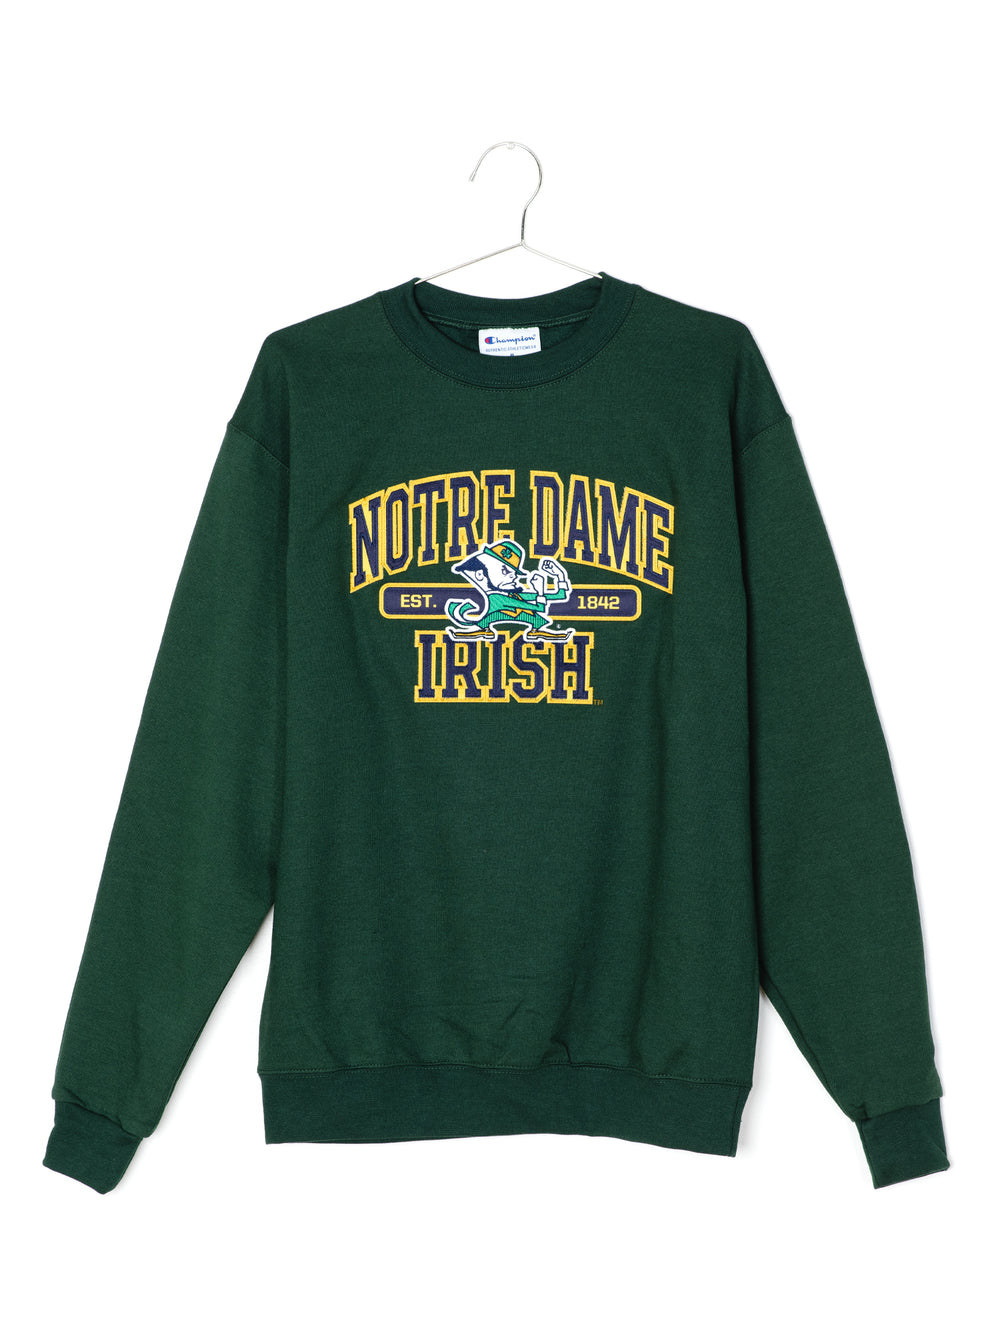 CHAMPION ECO POWERBLEND NOTRE DAME CREWNECK SWEATER - CLEARANCE